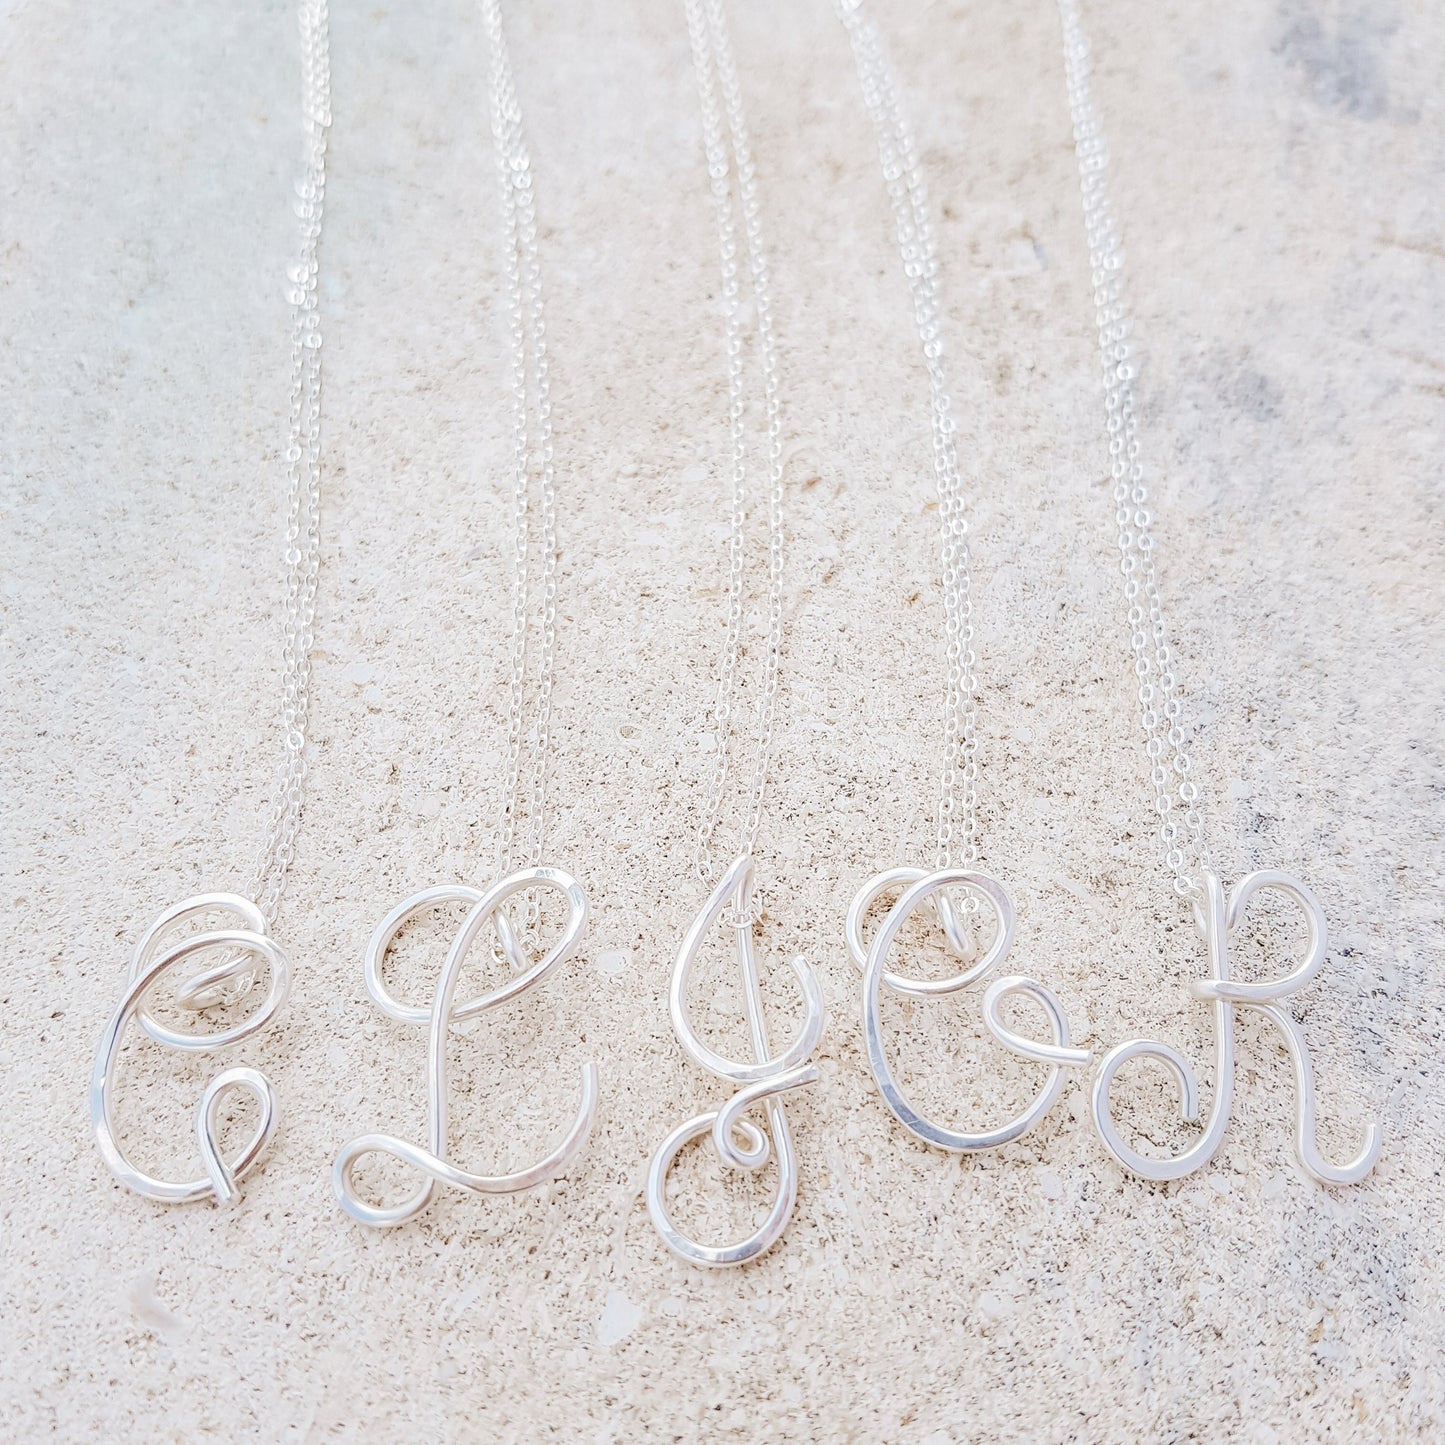 L Custom Letter Necklace • Personalized Name Necklace • L Custom Initials Necklace • Personalized Gift • Mother's Day Gift